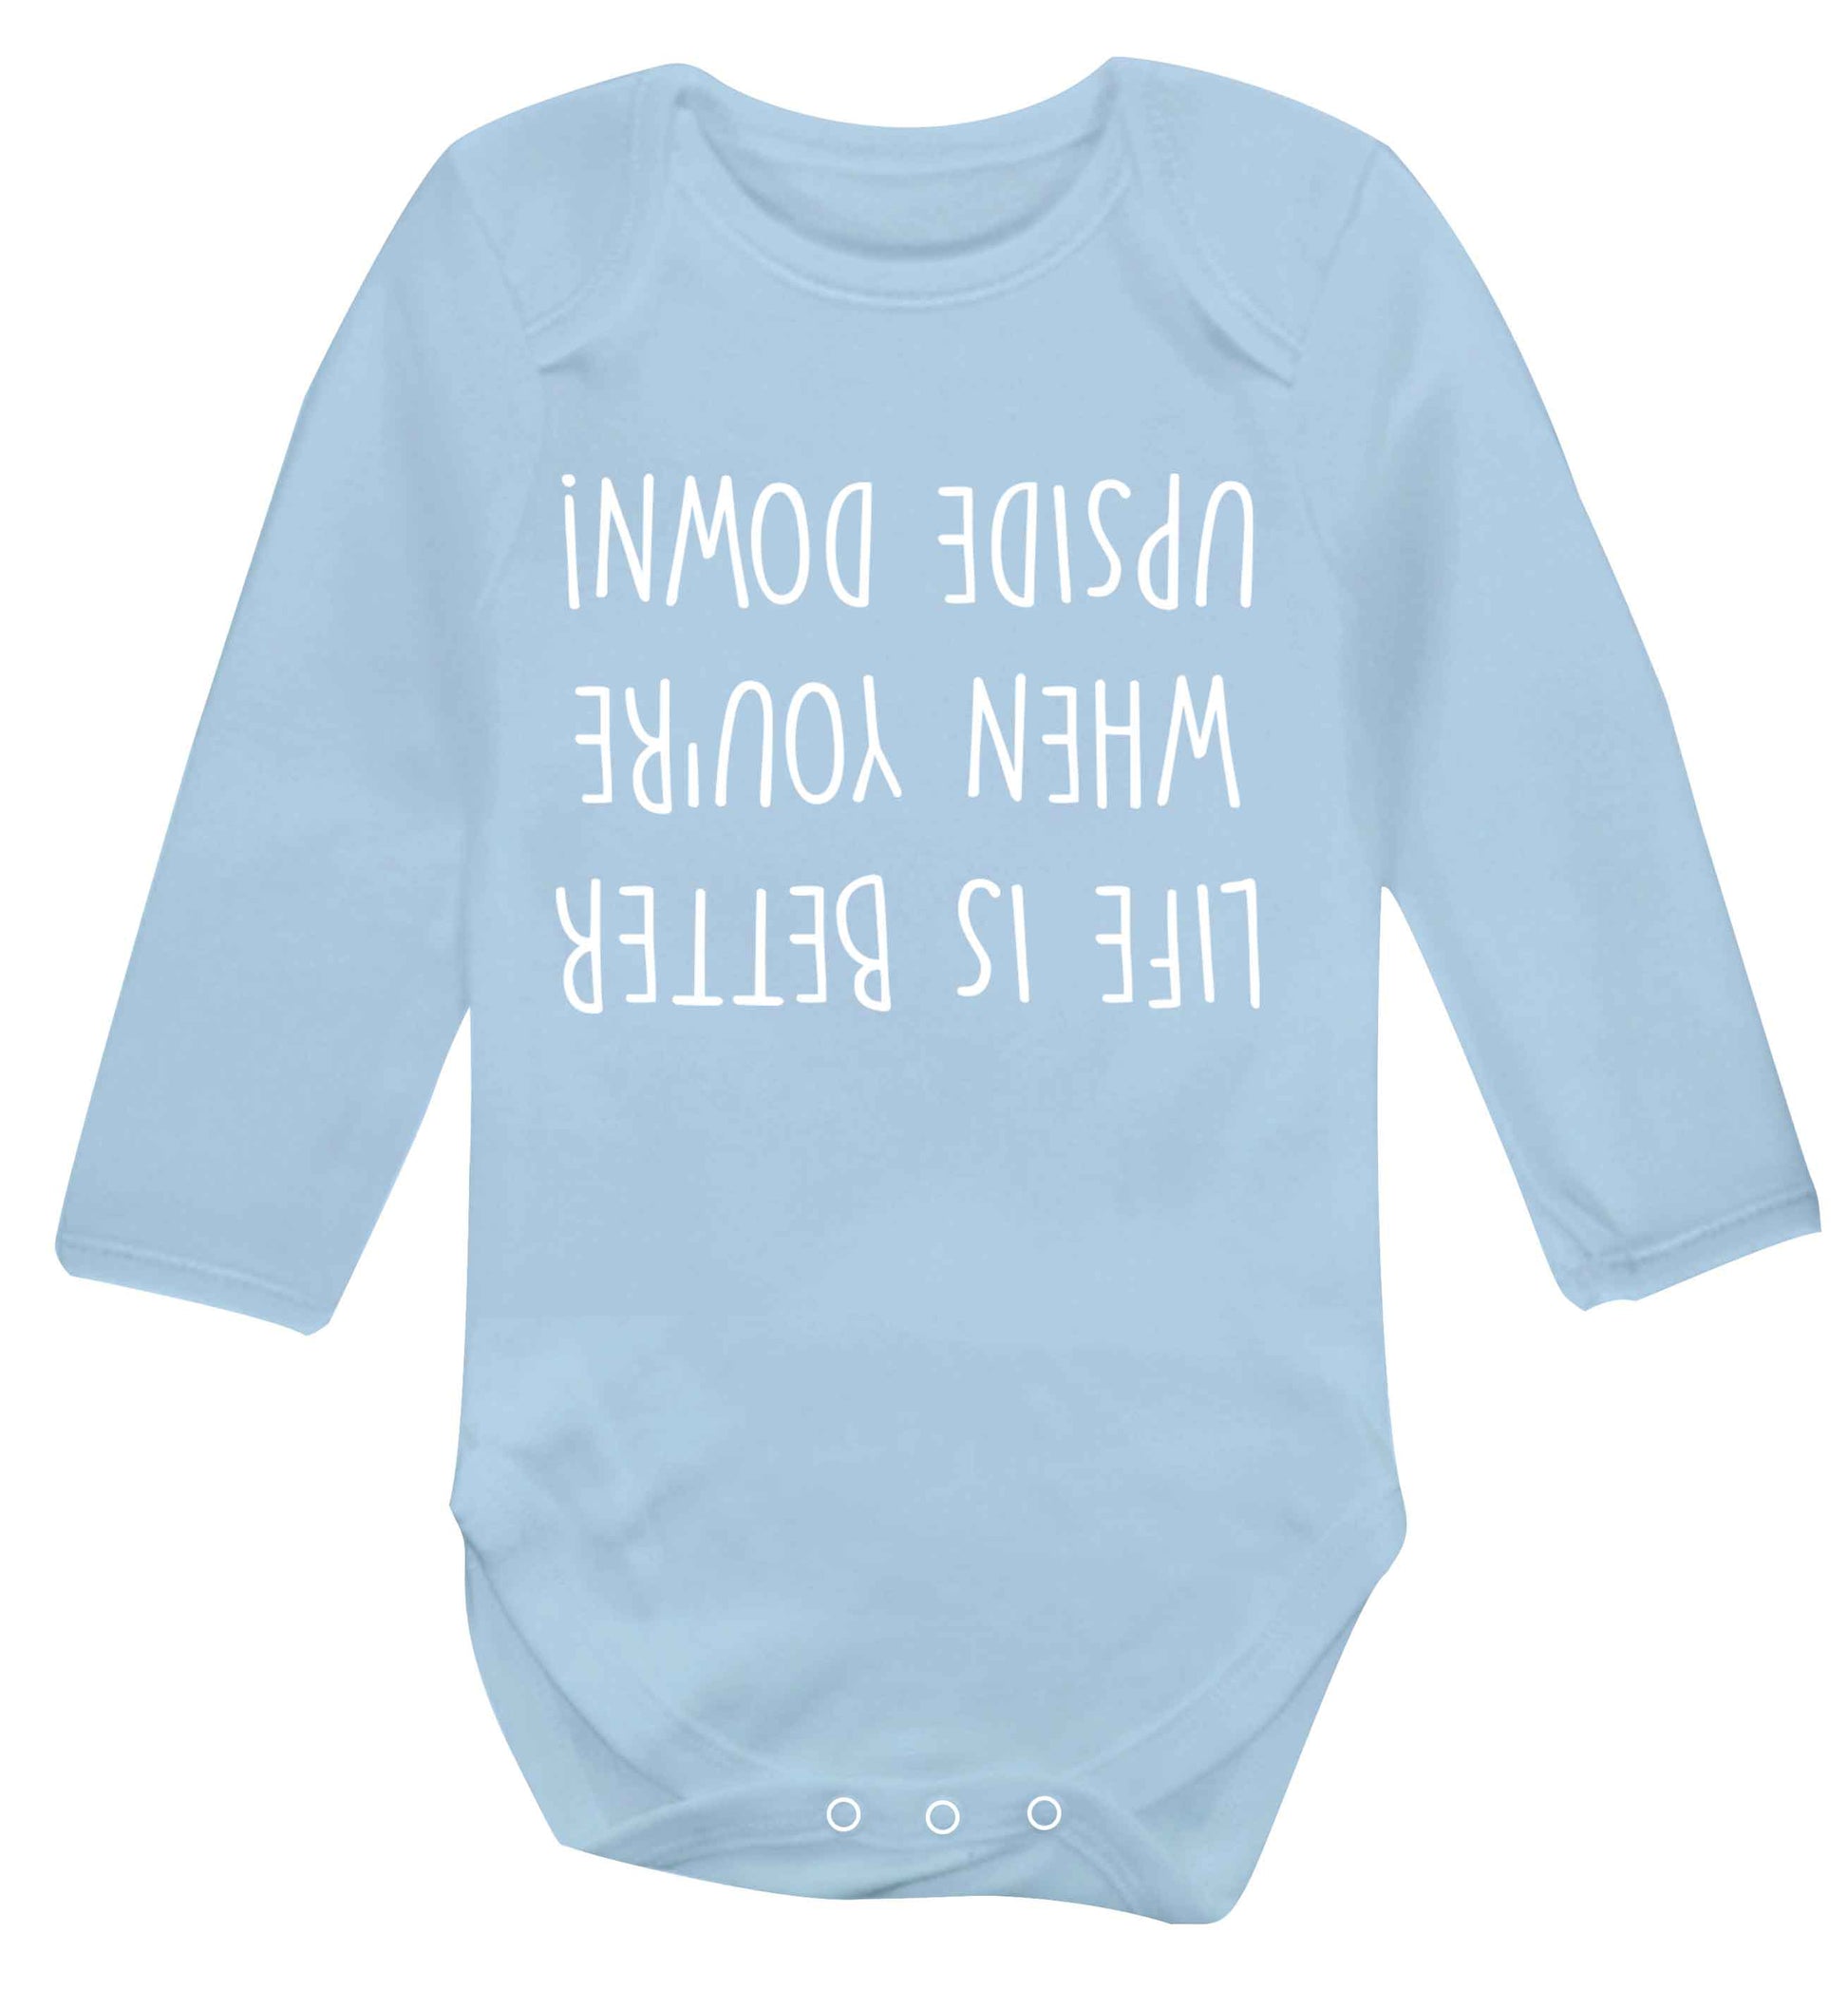 Life is better upside down Baby Vest long sleeved pale blue 6-12 months